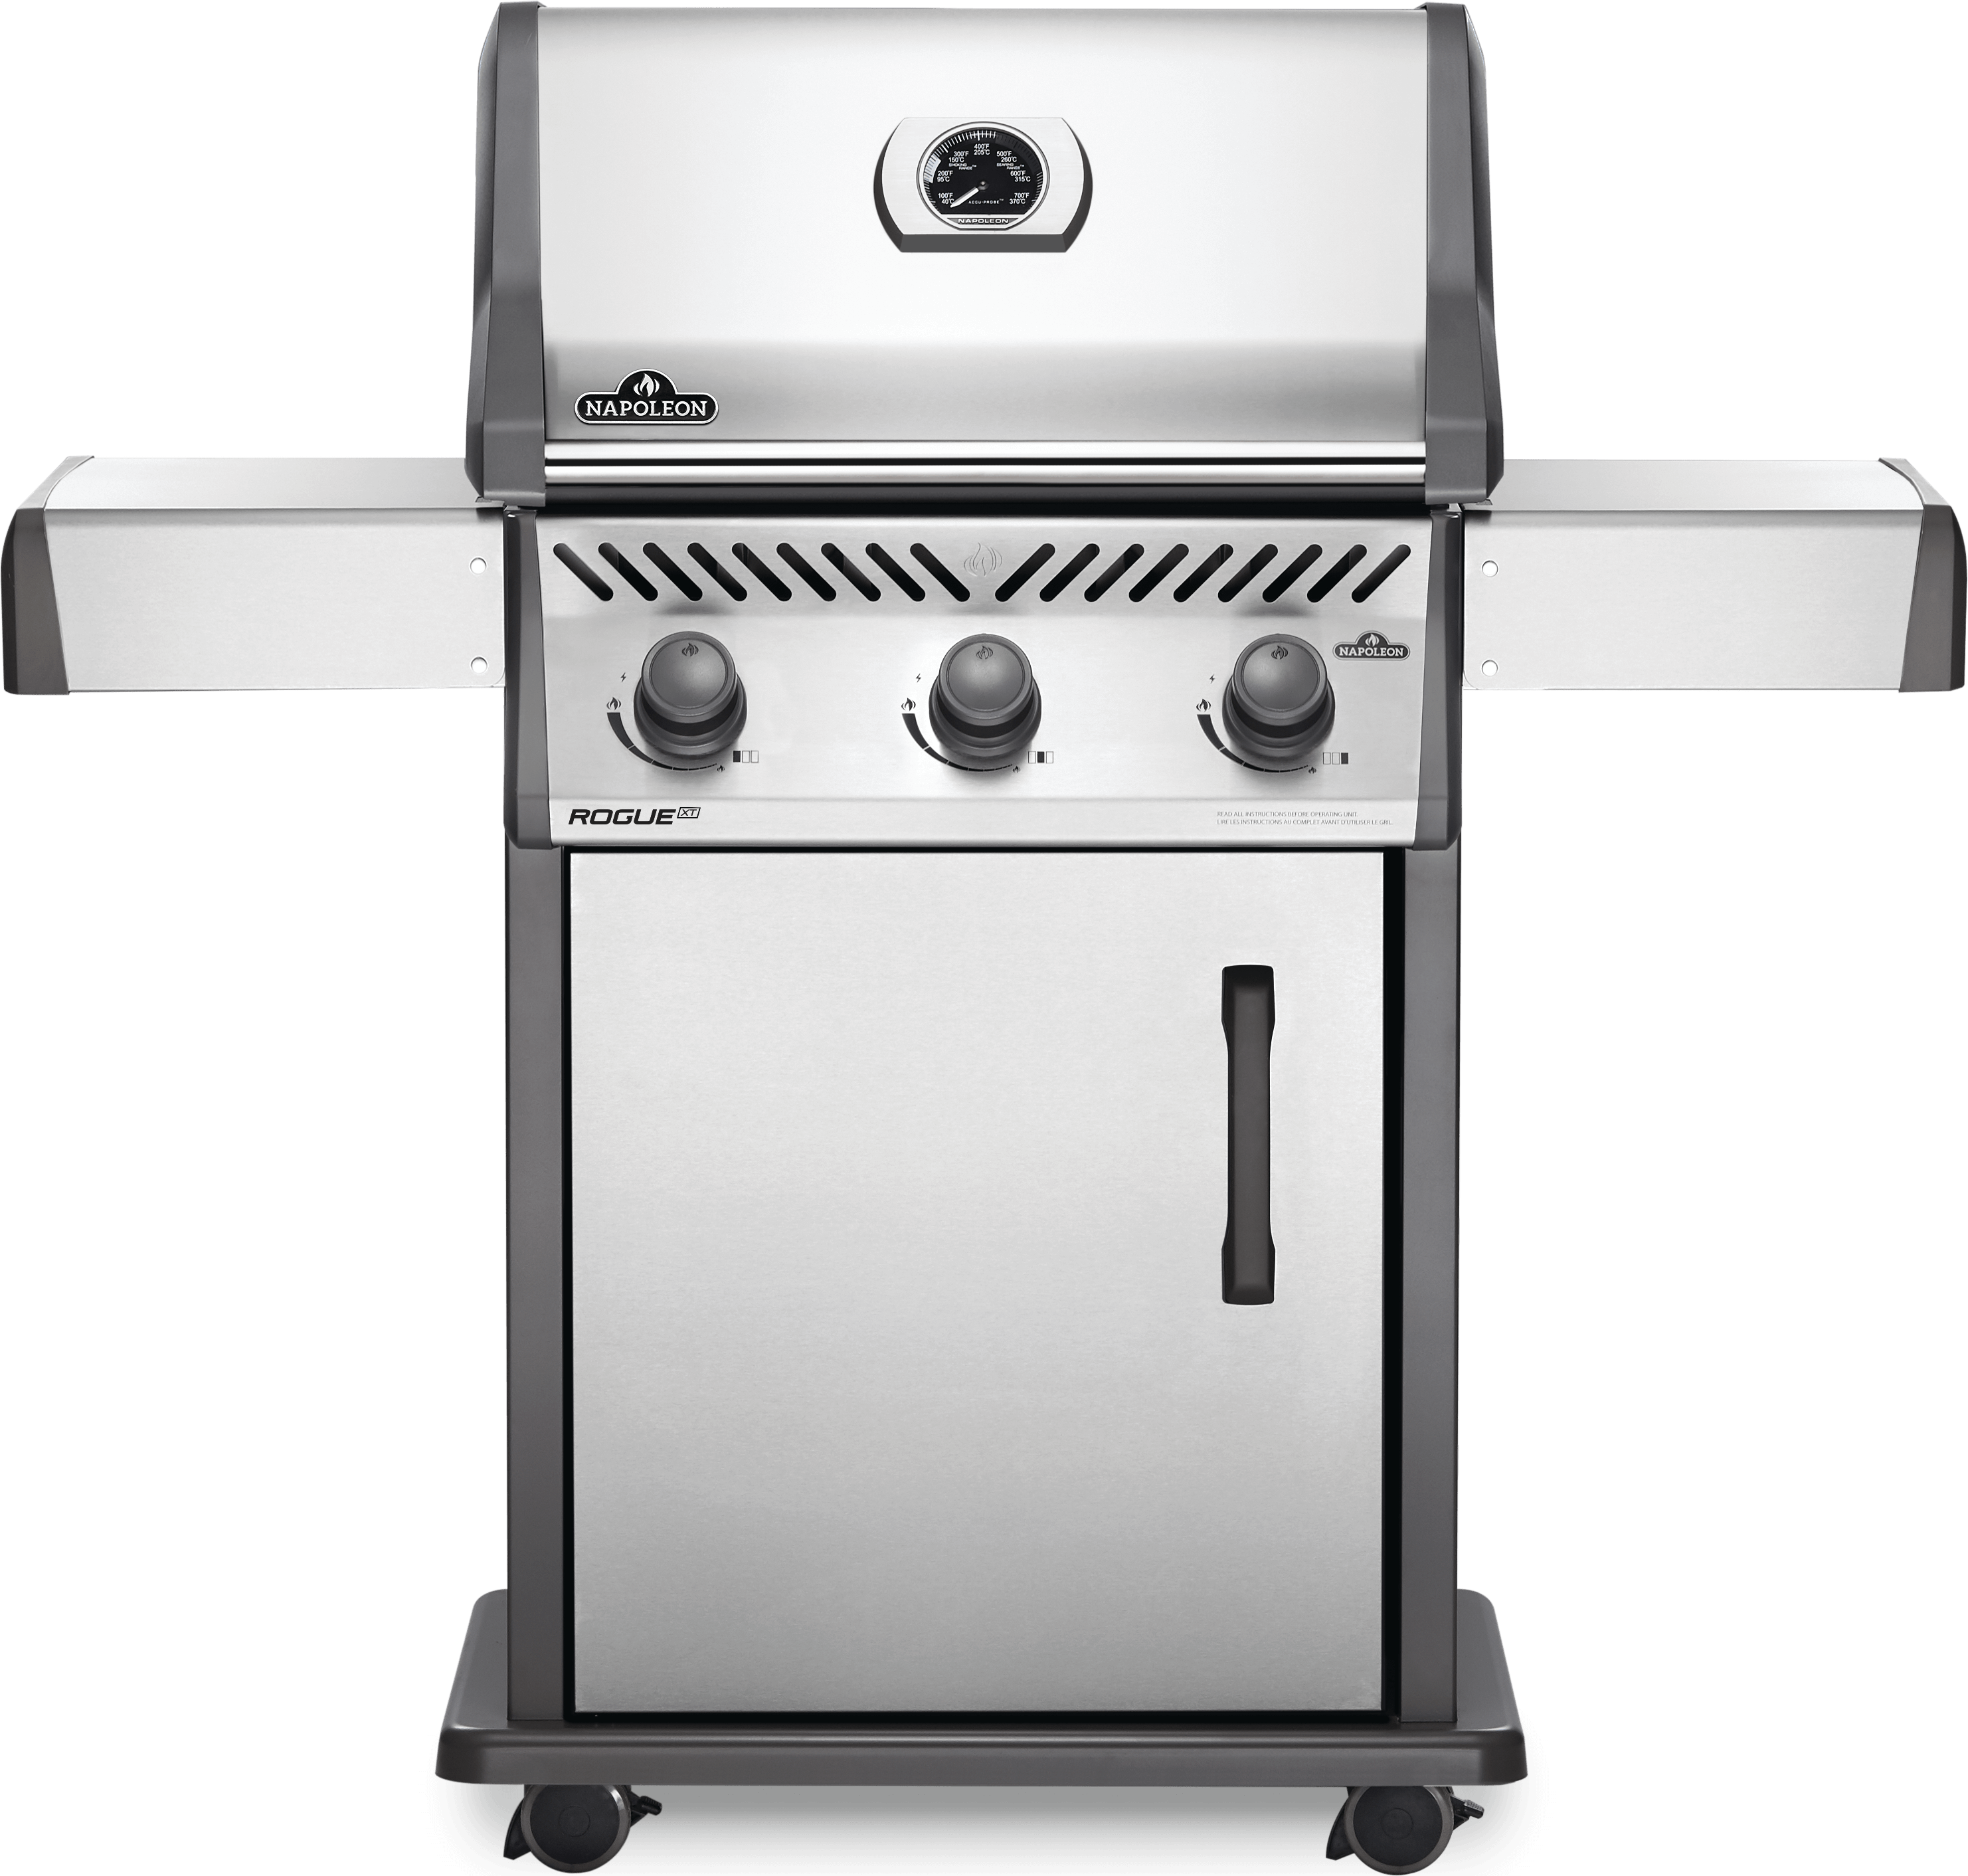 Napoleon Rogue XT 425 Propane Gas Grill, Stainless Steel - image 1 of 13